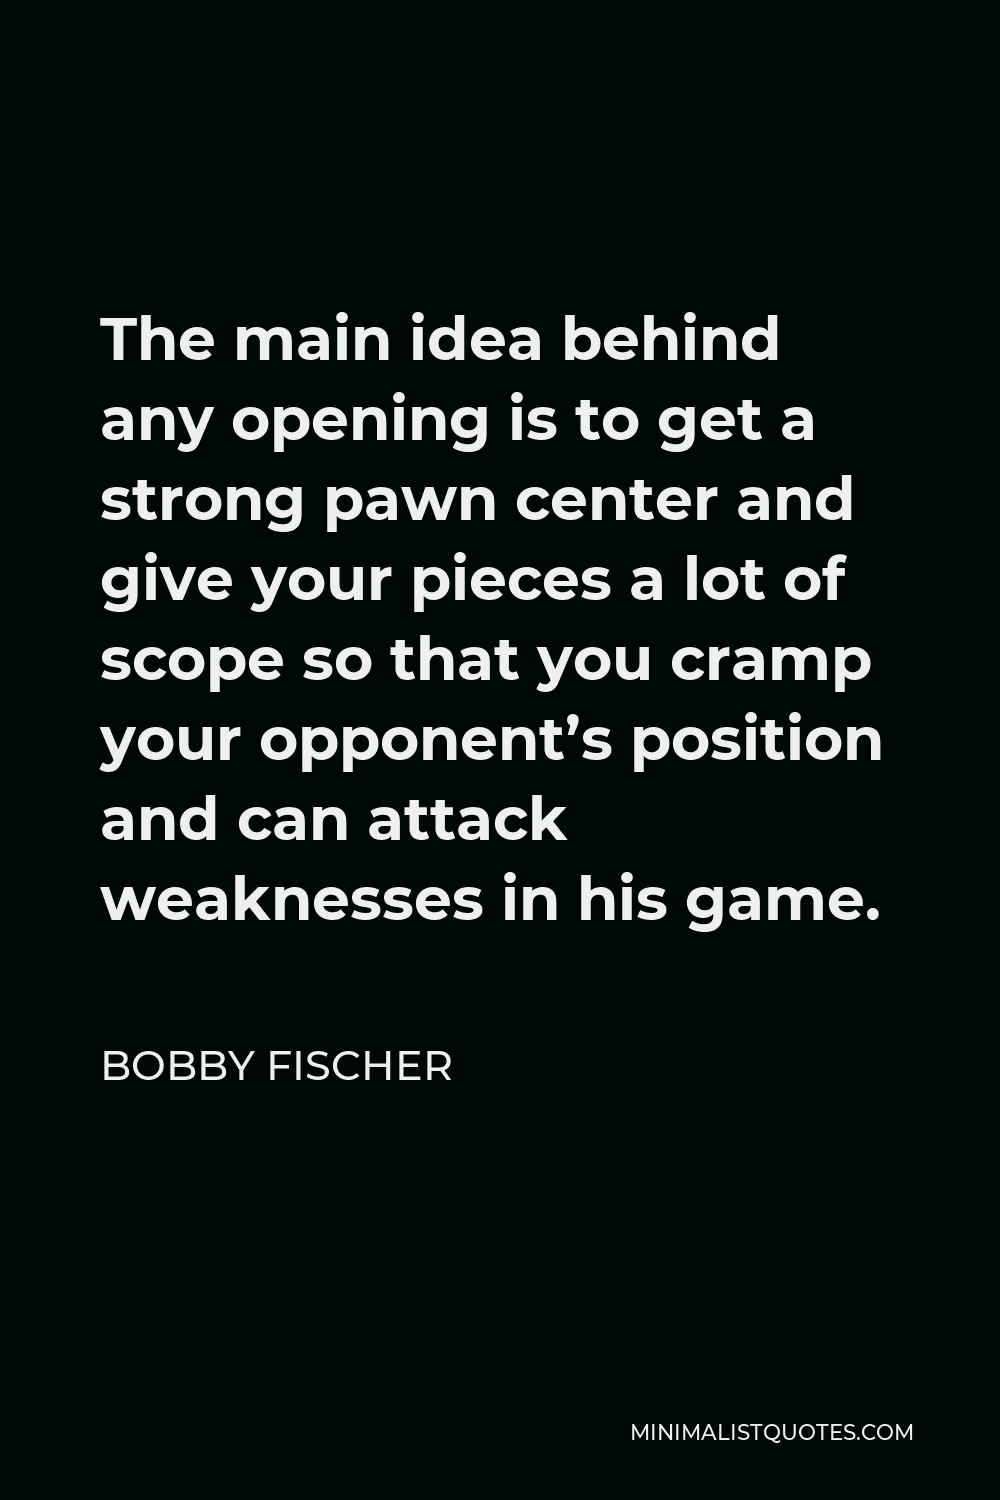 Bobby Fischer Quote - The main idea behind any opening is to get a strong pawn center and give your pieces a lot of scope so that you cramp your opponent’s position and can attack weaknesses in his game.